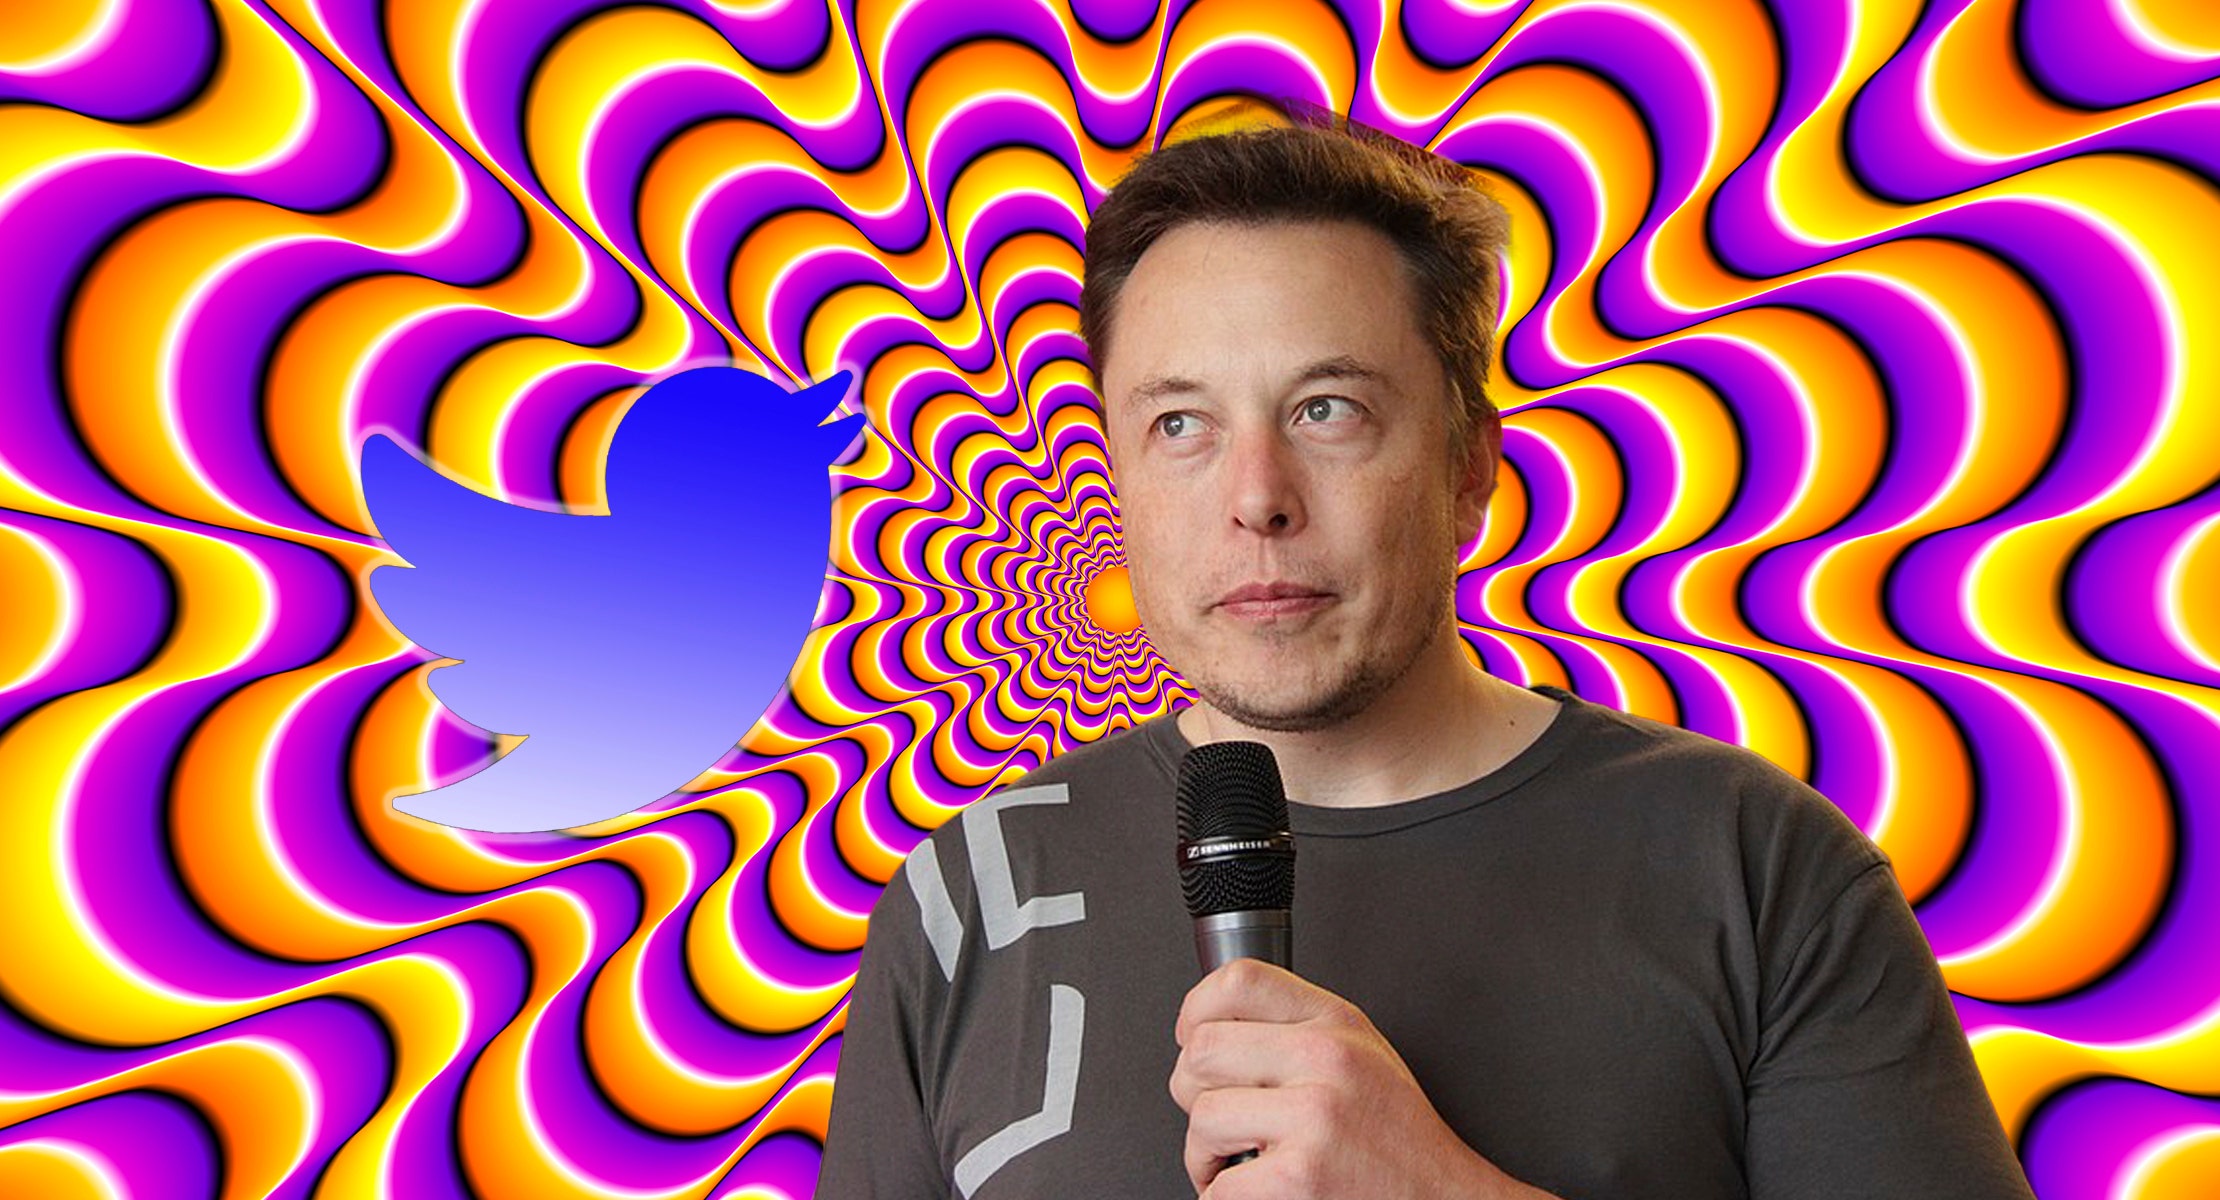 Elon Musk Joins Twitter Conversation About Psychedelics: A Debate On Empathy